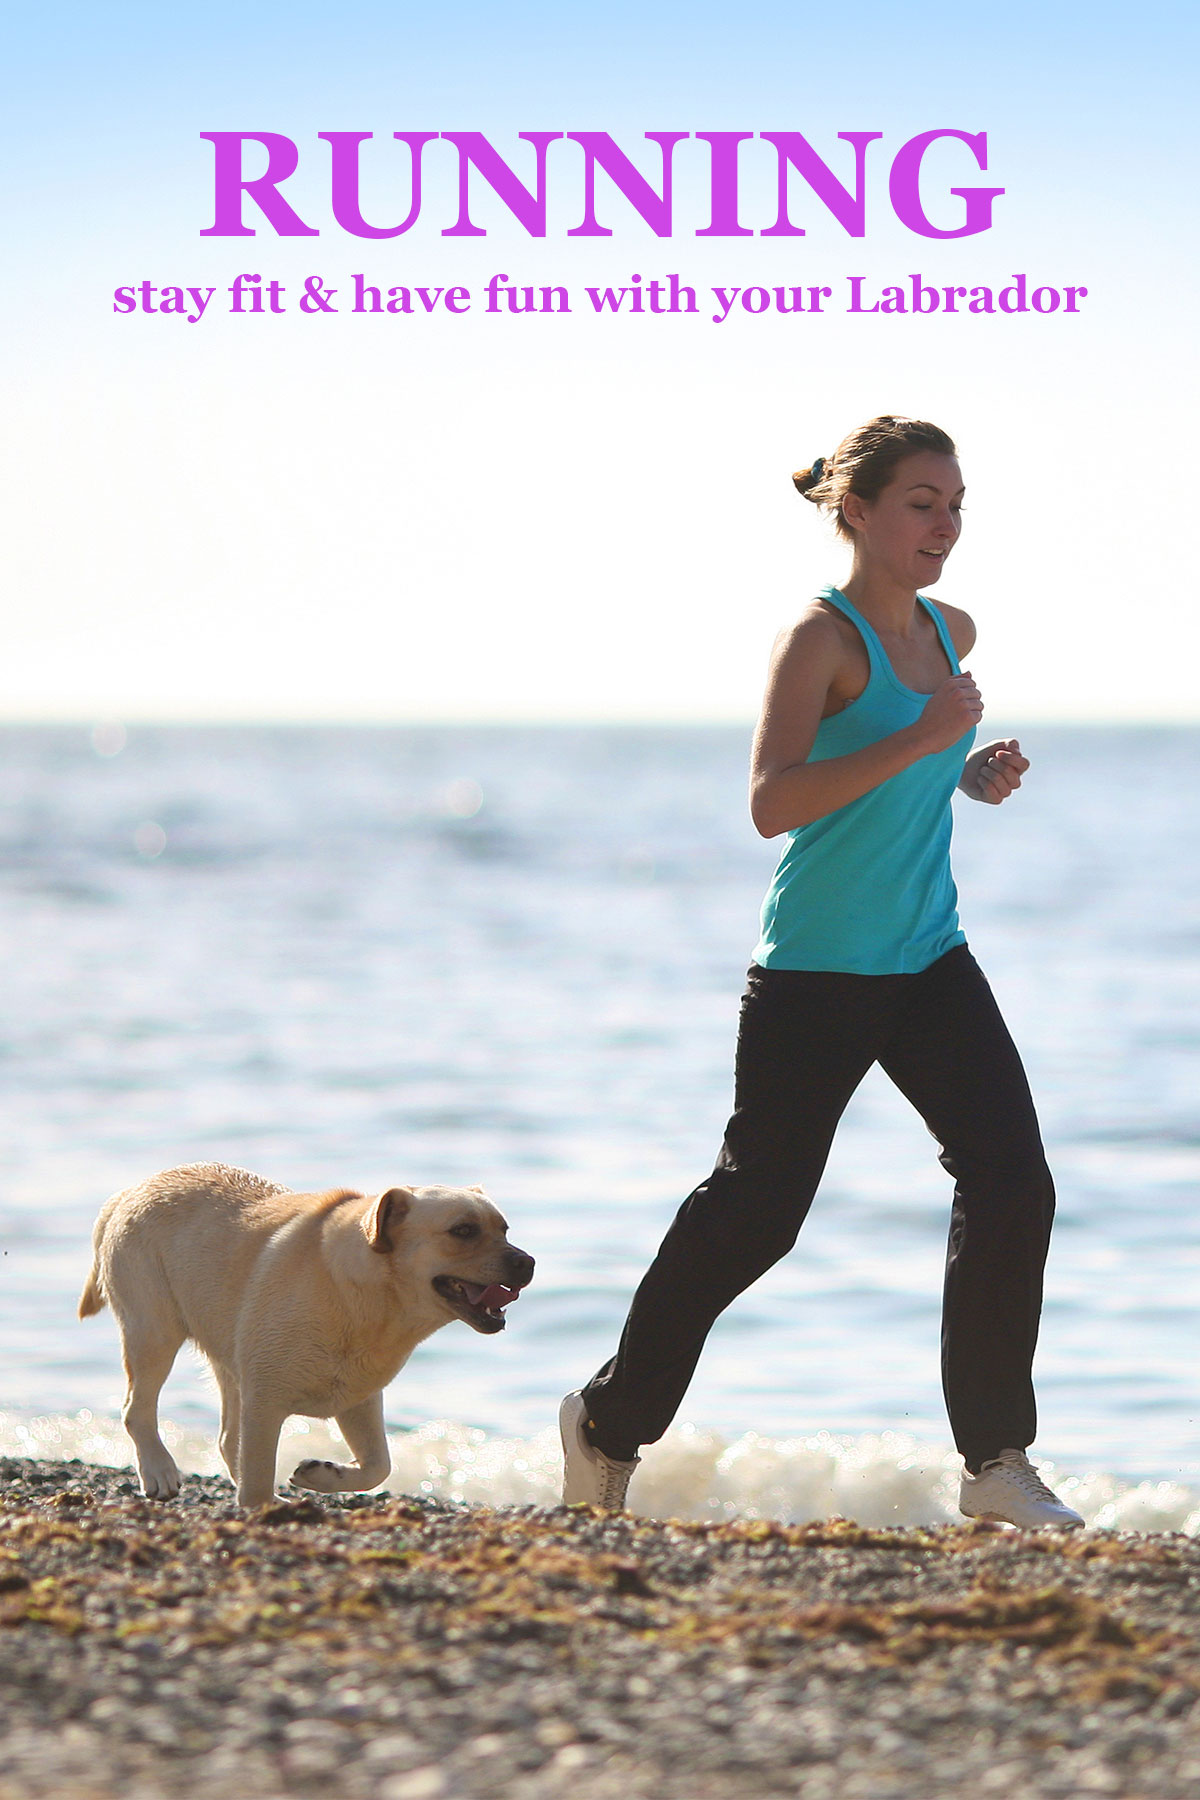 how do you jog with your dog